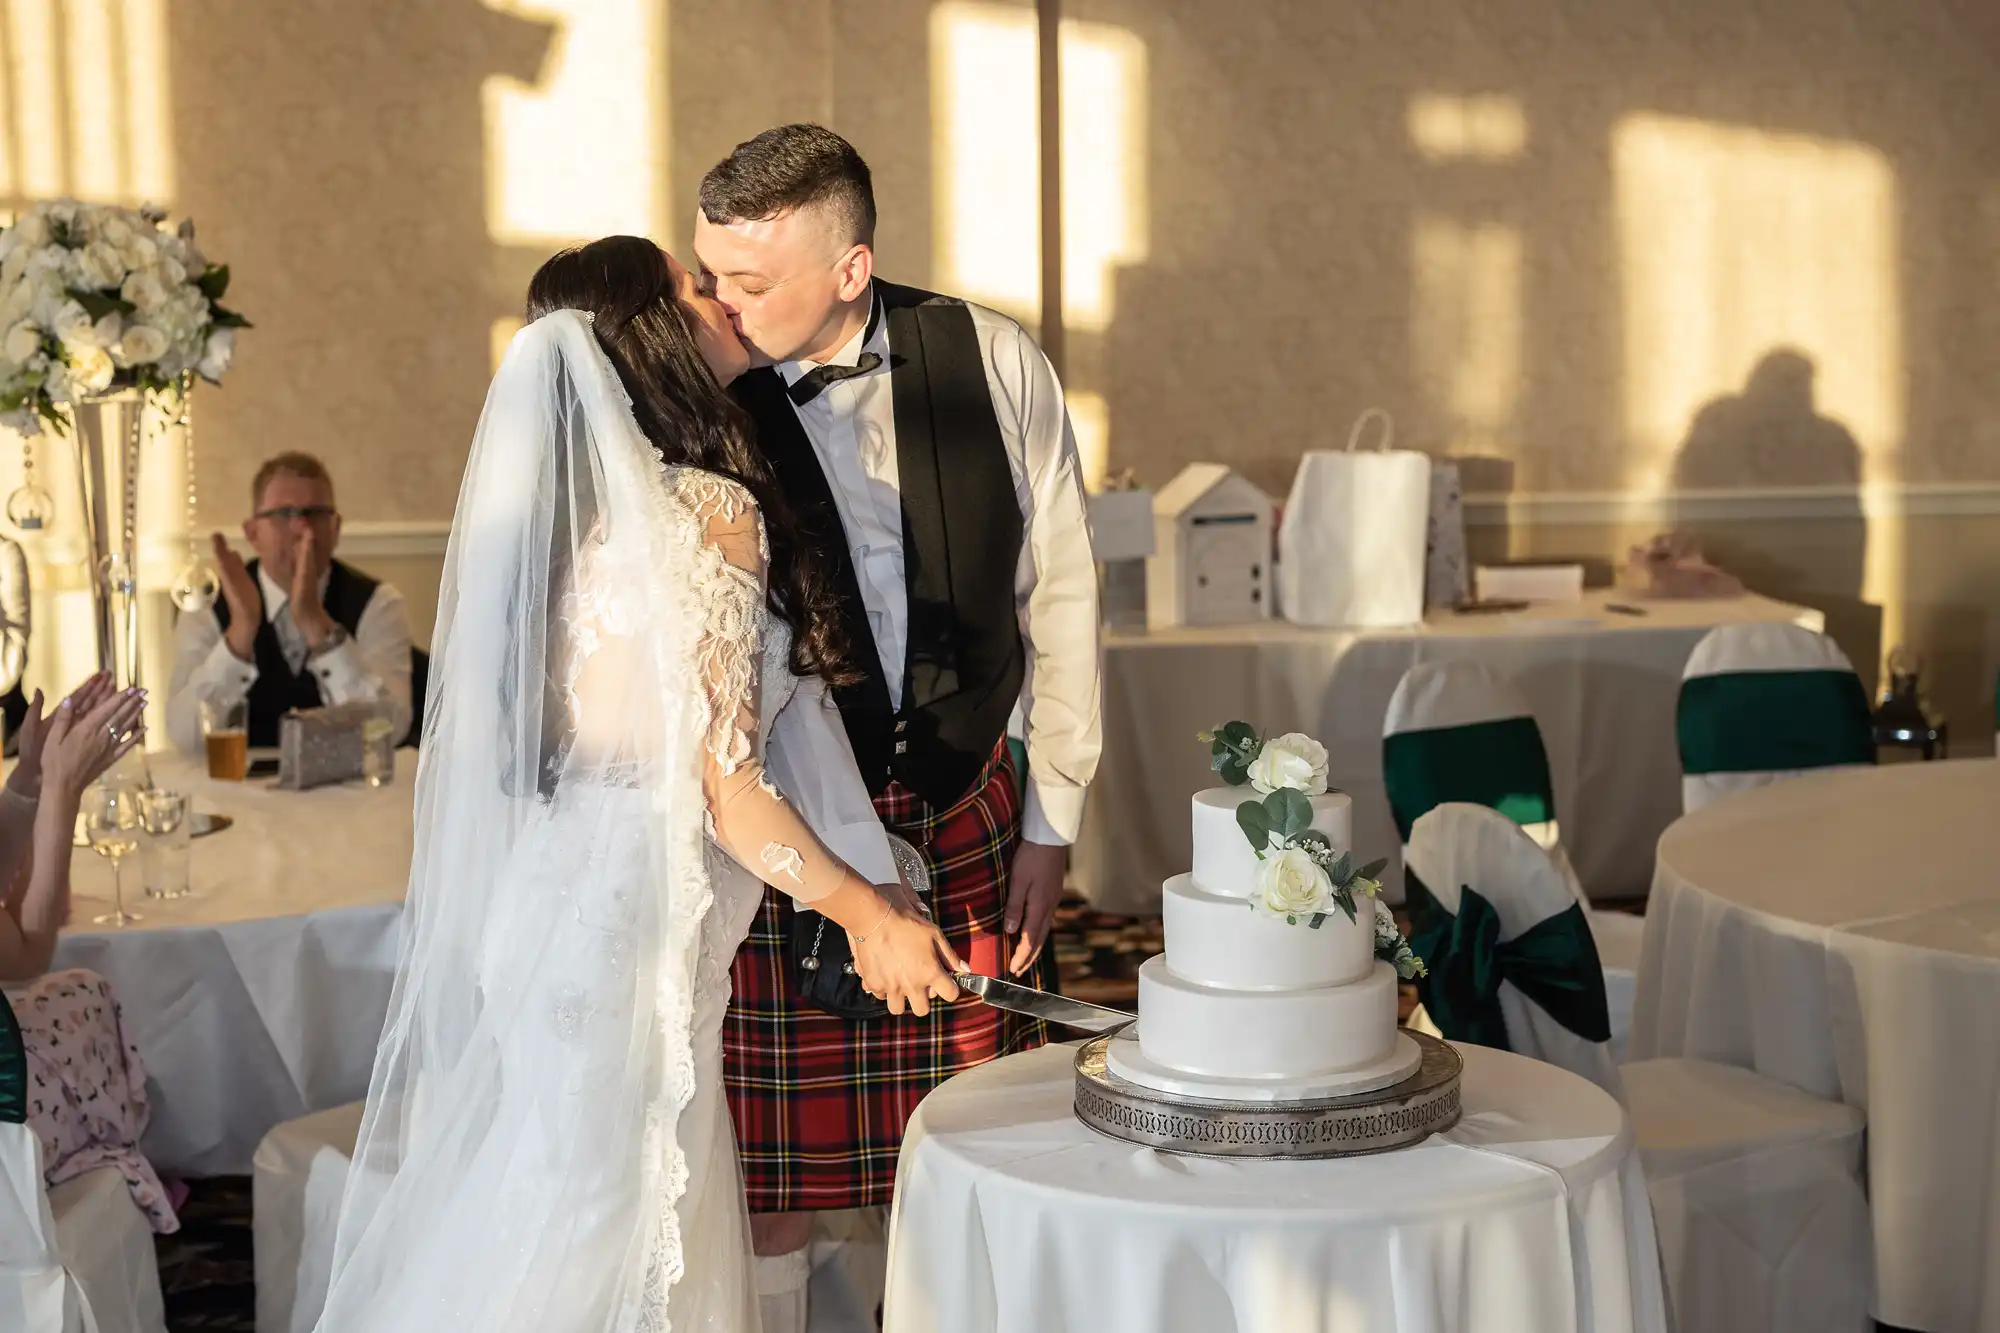 A bride and groom in a kilt cutting a wedding cake together in a sunlit room, while guests watch.